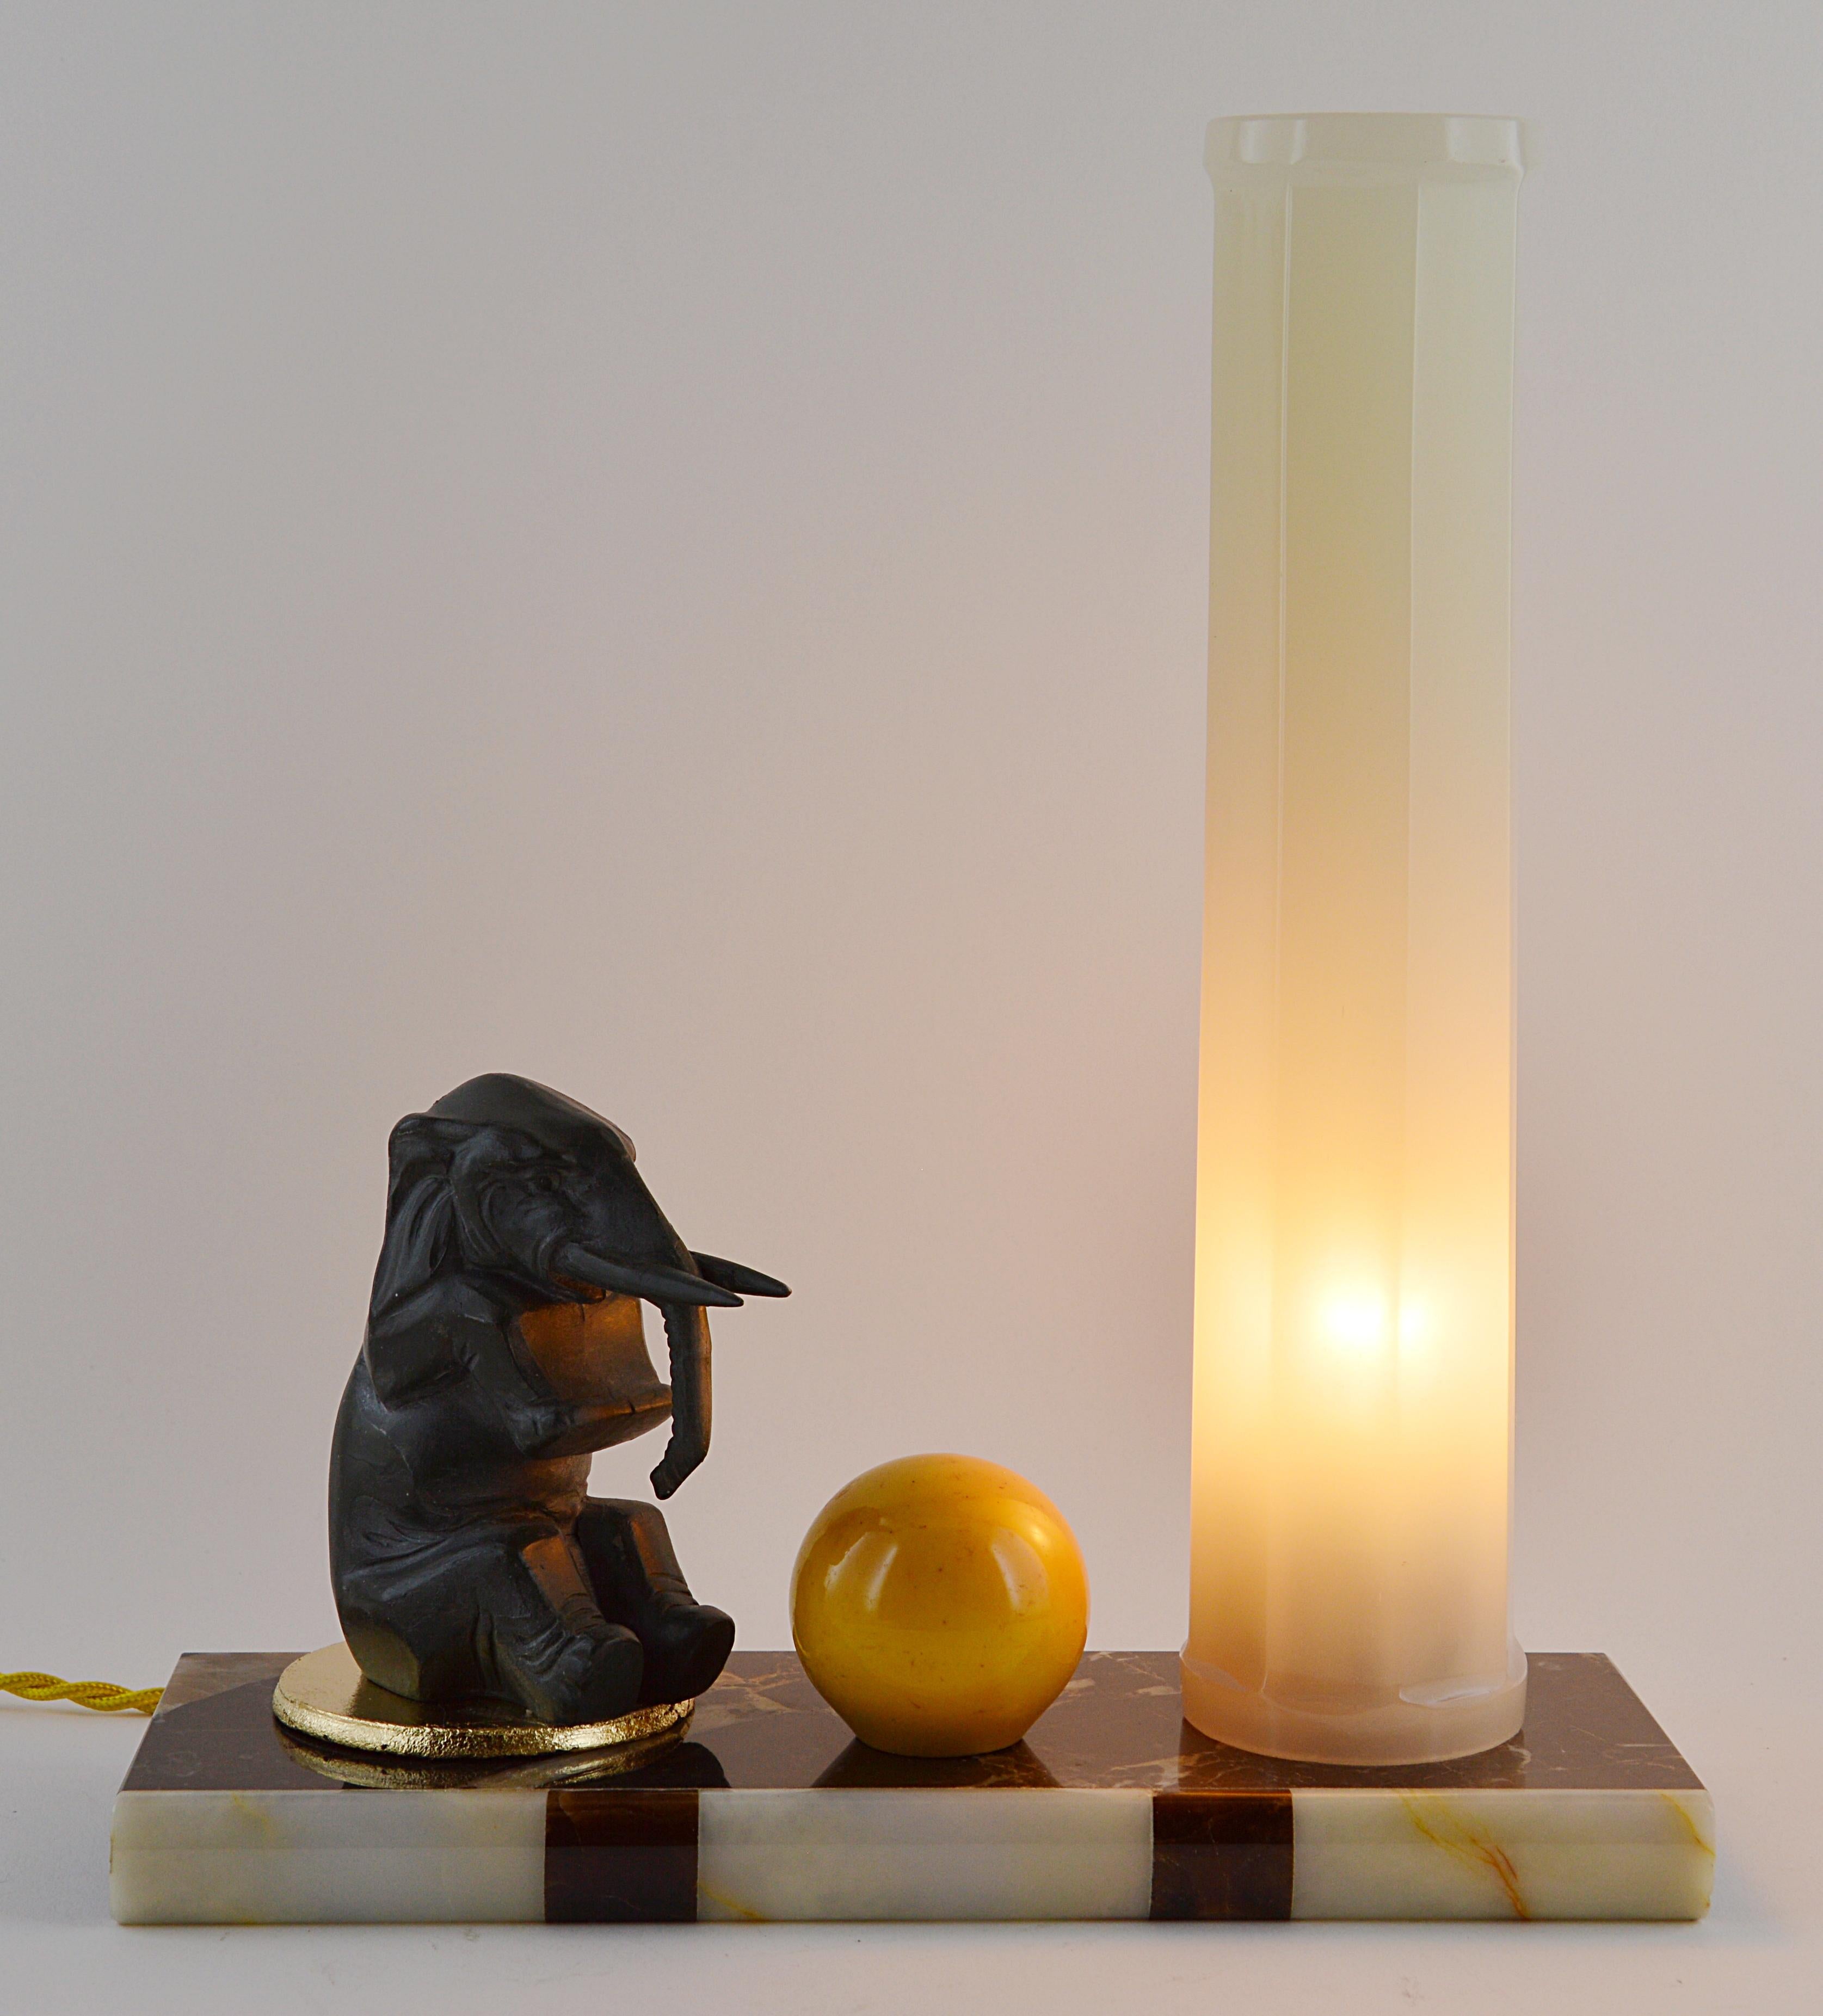 French Art Deco table lamp or night-light, 1930s. Spelter elephant near a big bakelite ball. Superb thick neoclassical antique column shade. Marble and onyx base.

 